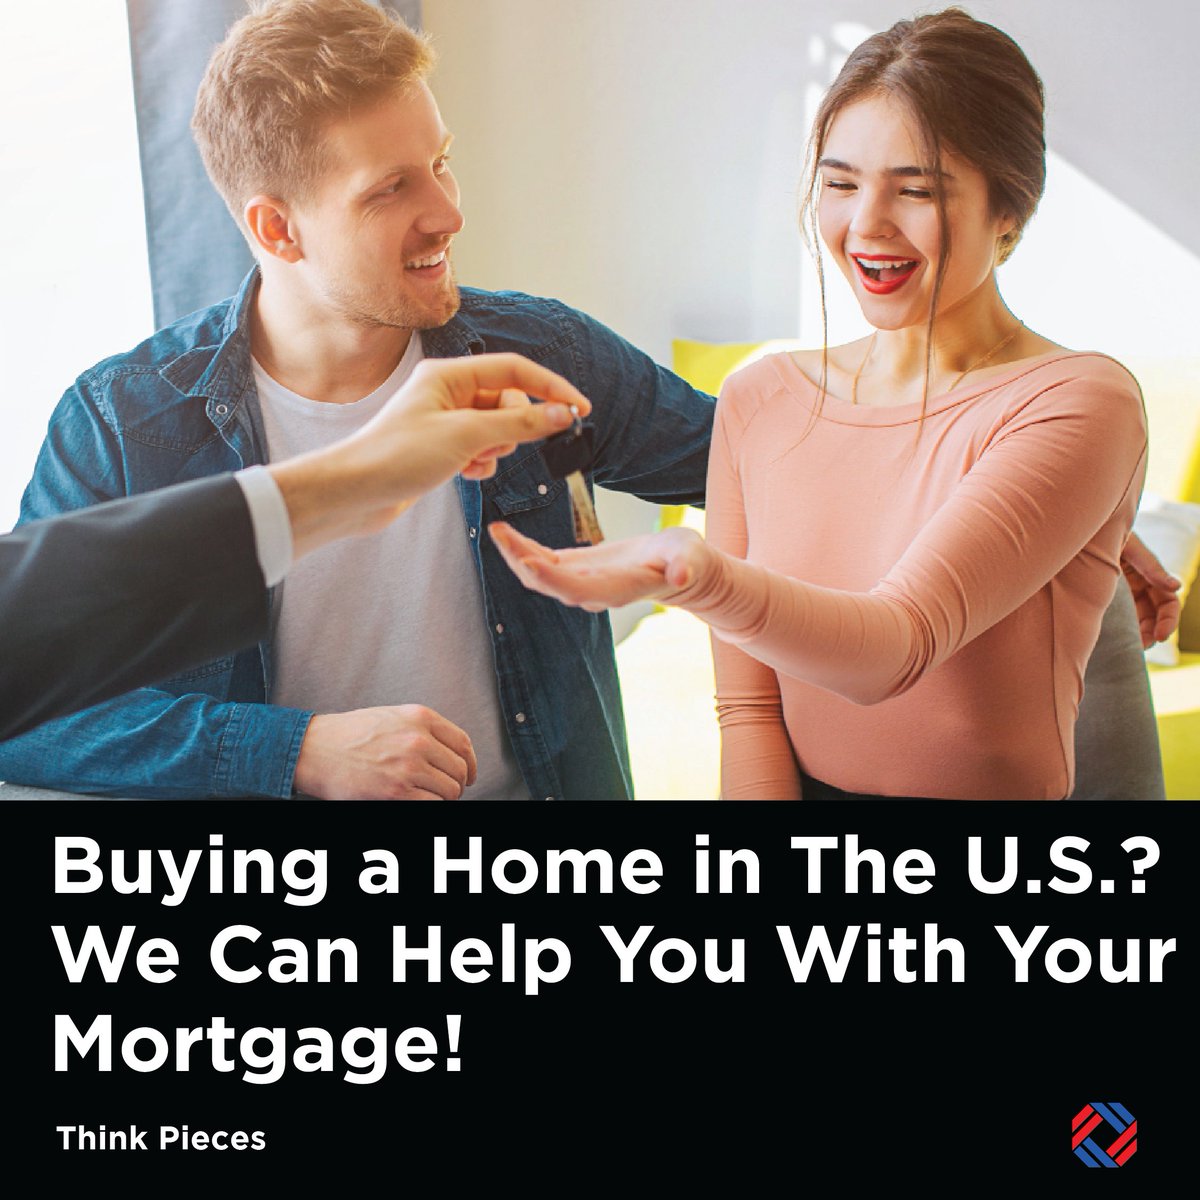 🇺🇸 U.S. Expats & Foreign Nationals: Ready to Own a Home in the U.S.? We specialize in stress-free mortgages tailored to your unique needs. Reach out to us at hello@americamortgages.com

#RealEstate #Mortgage #Homeownership #purchaseahome #purchaseproperty #mortgage #USrealestate